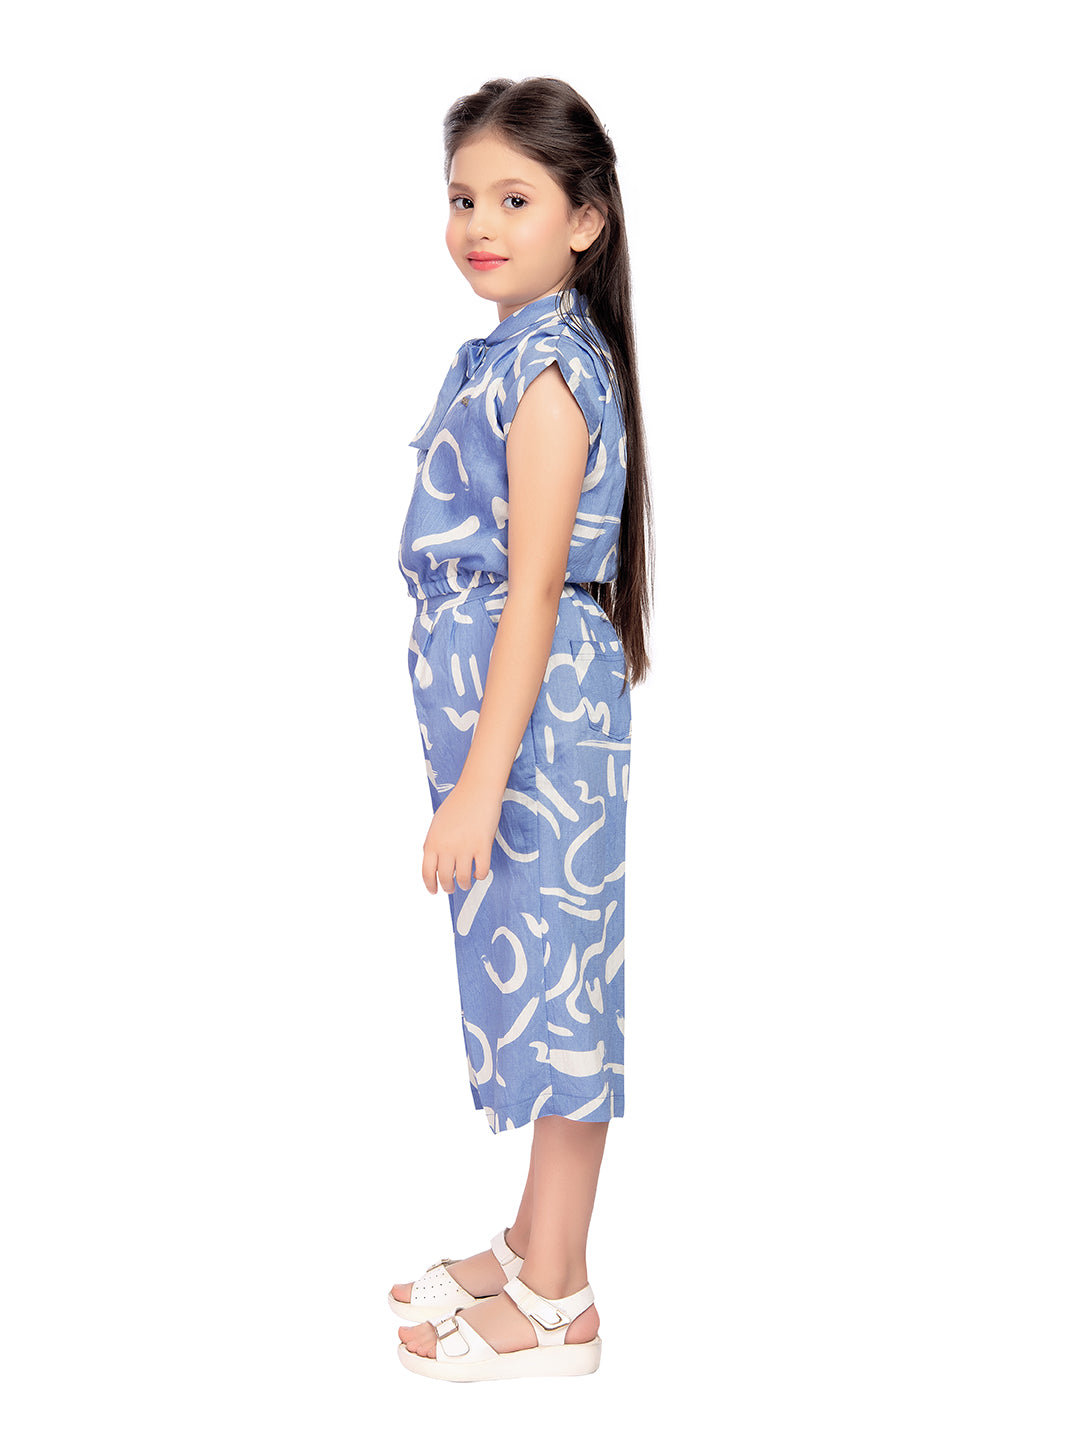 Tiny Baby Blue Colored Culottes- 2174 Blue